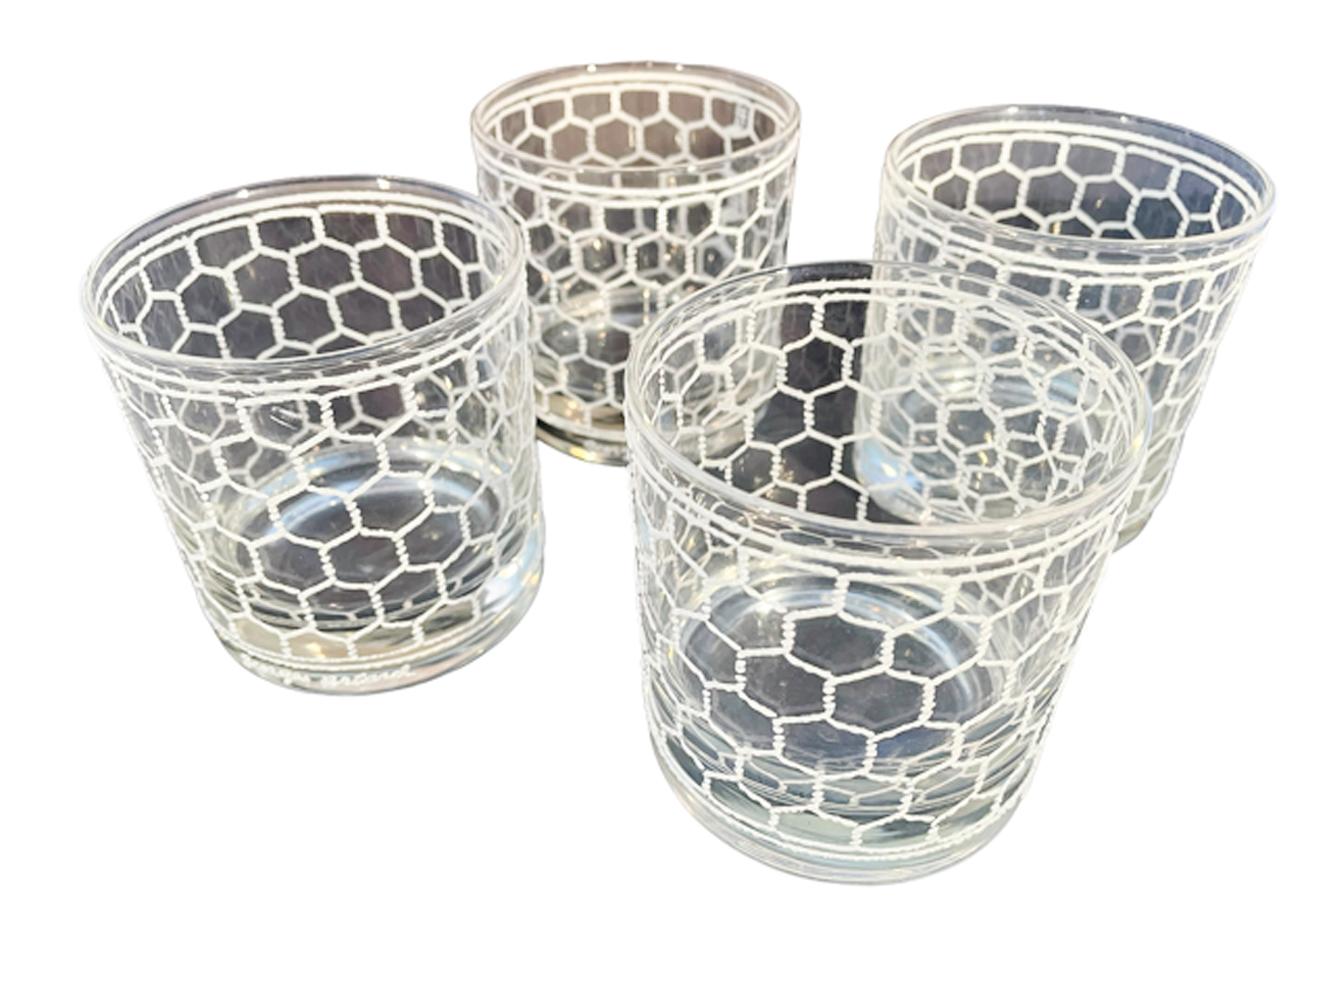 Four signed Georges Briard rocks glasses in clear glass with raised, textured white enamel design patterned after wire screening.